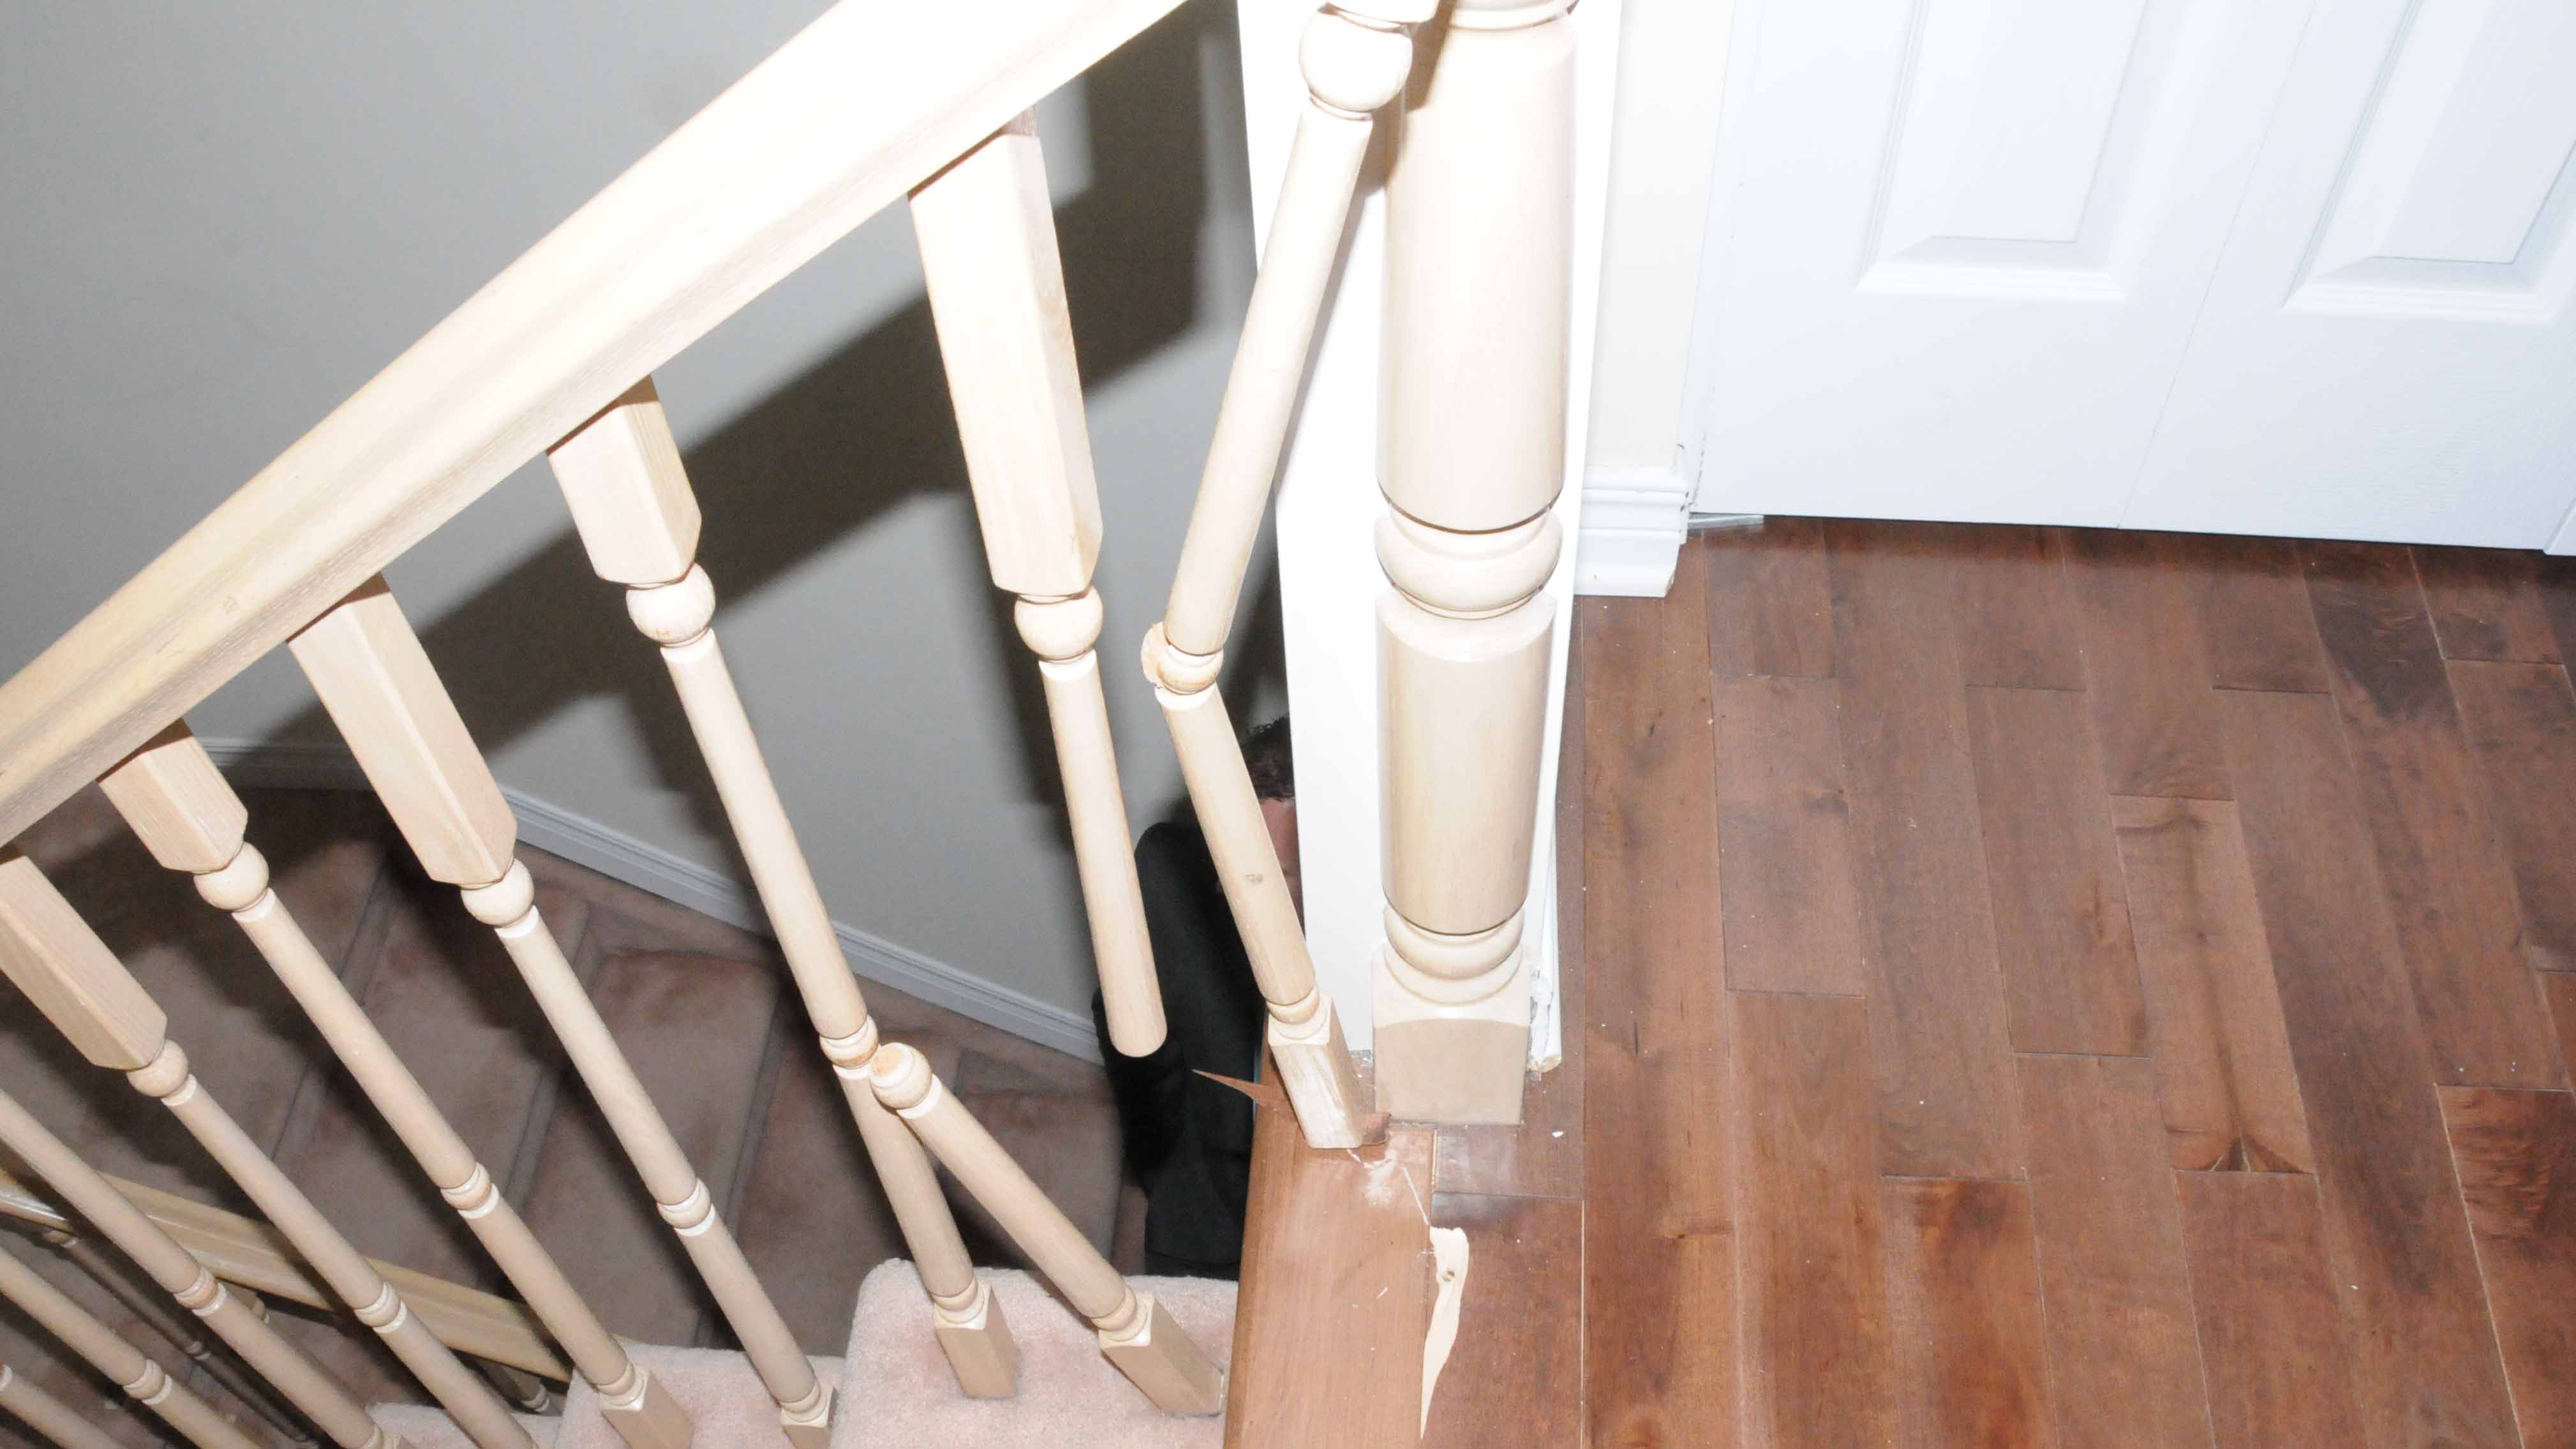 Photo of broken railing submitted as evidence in Brazeau's trial Monday.